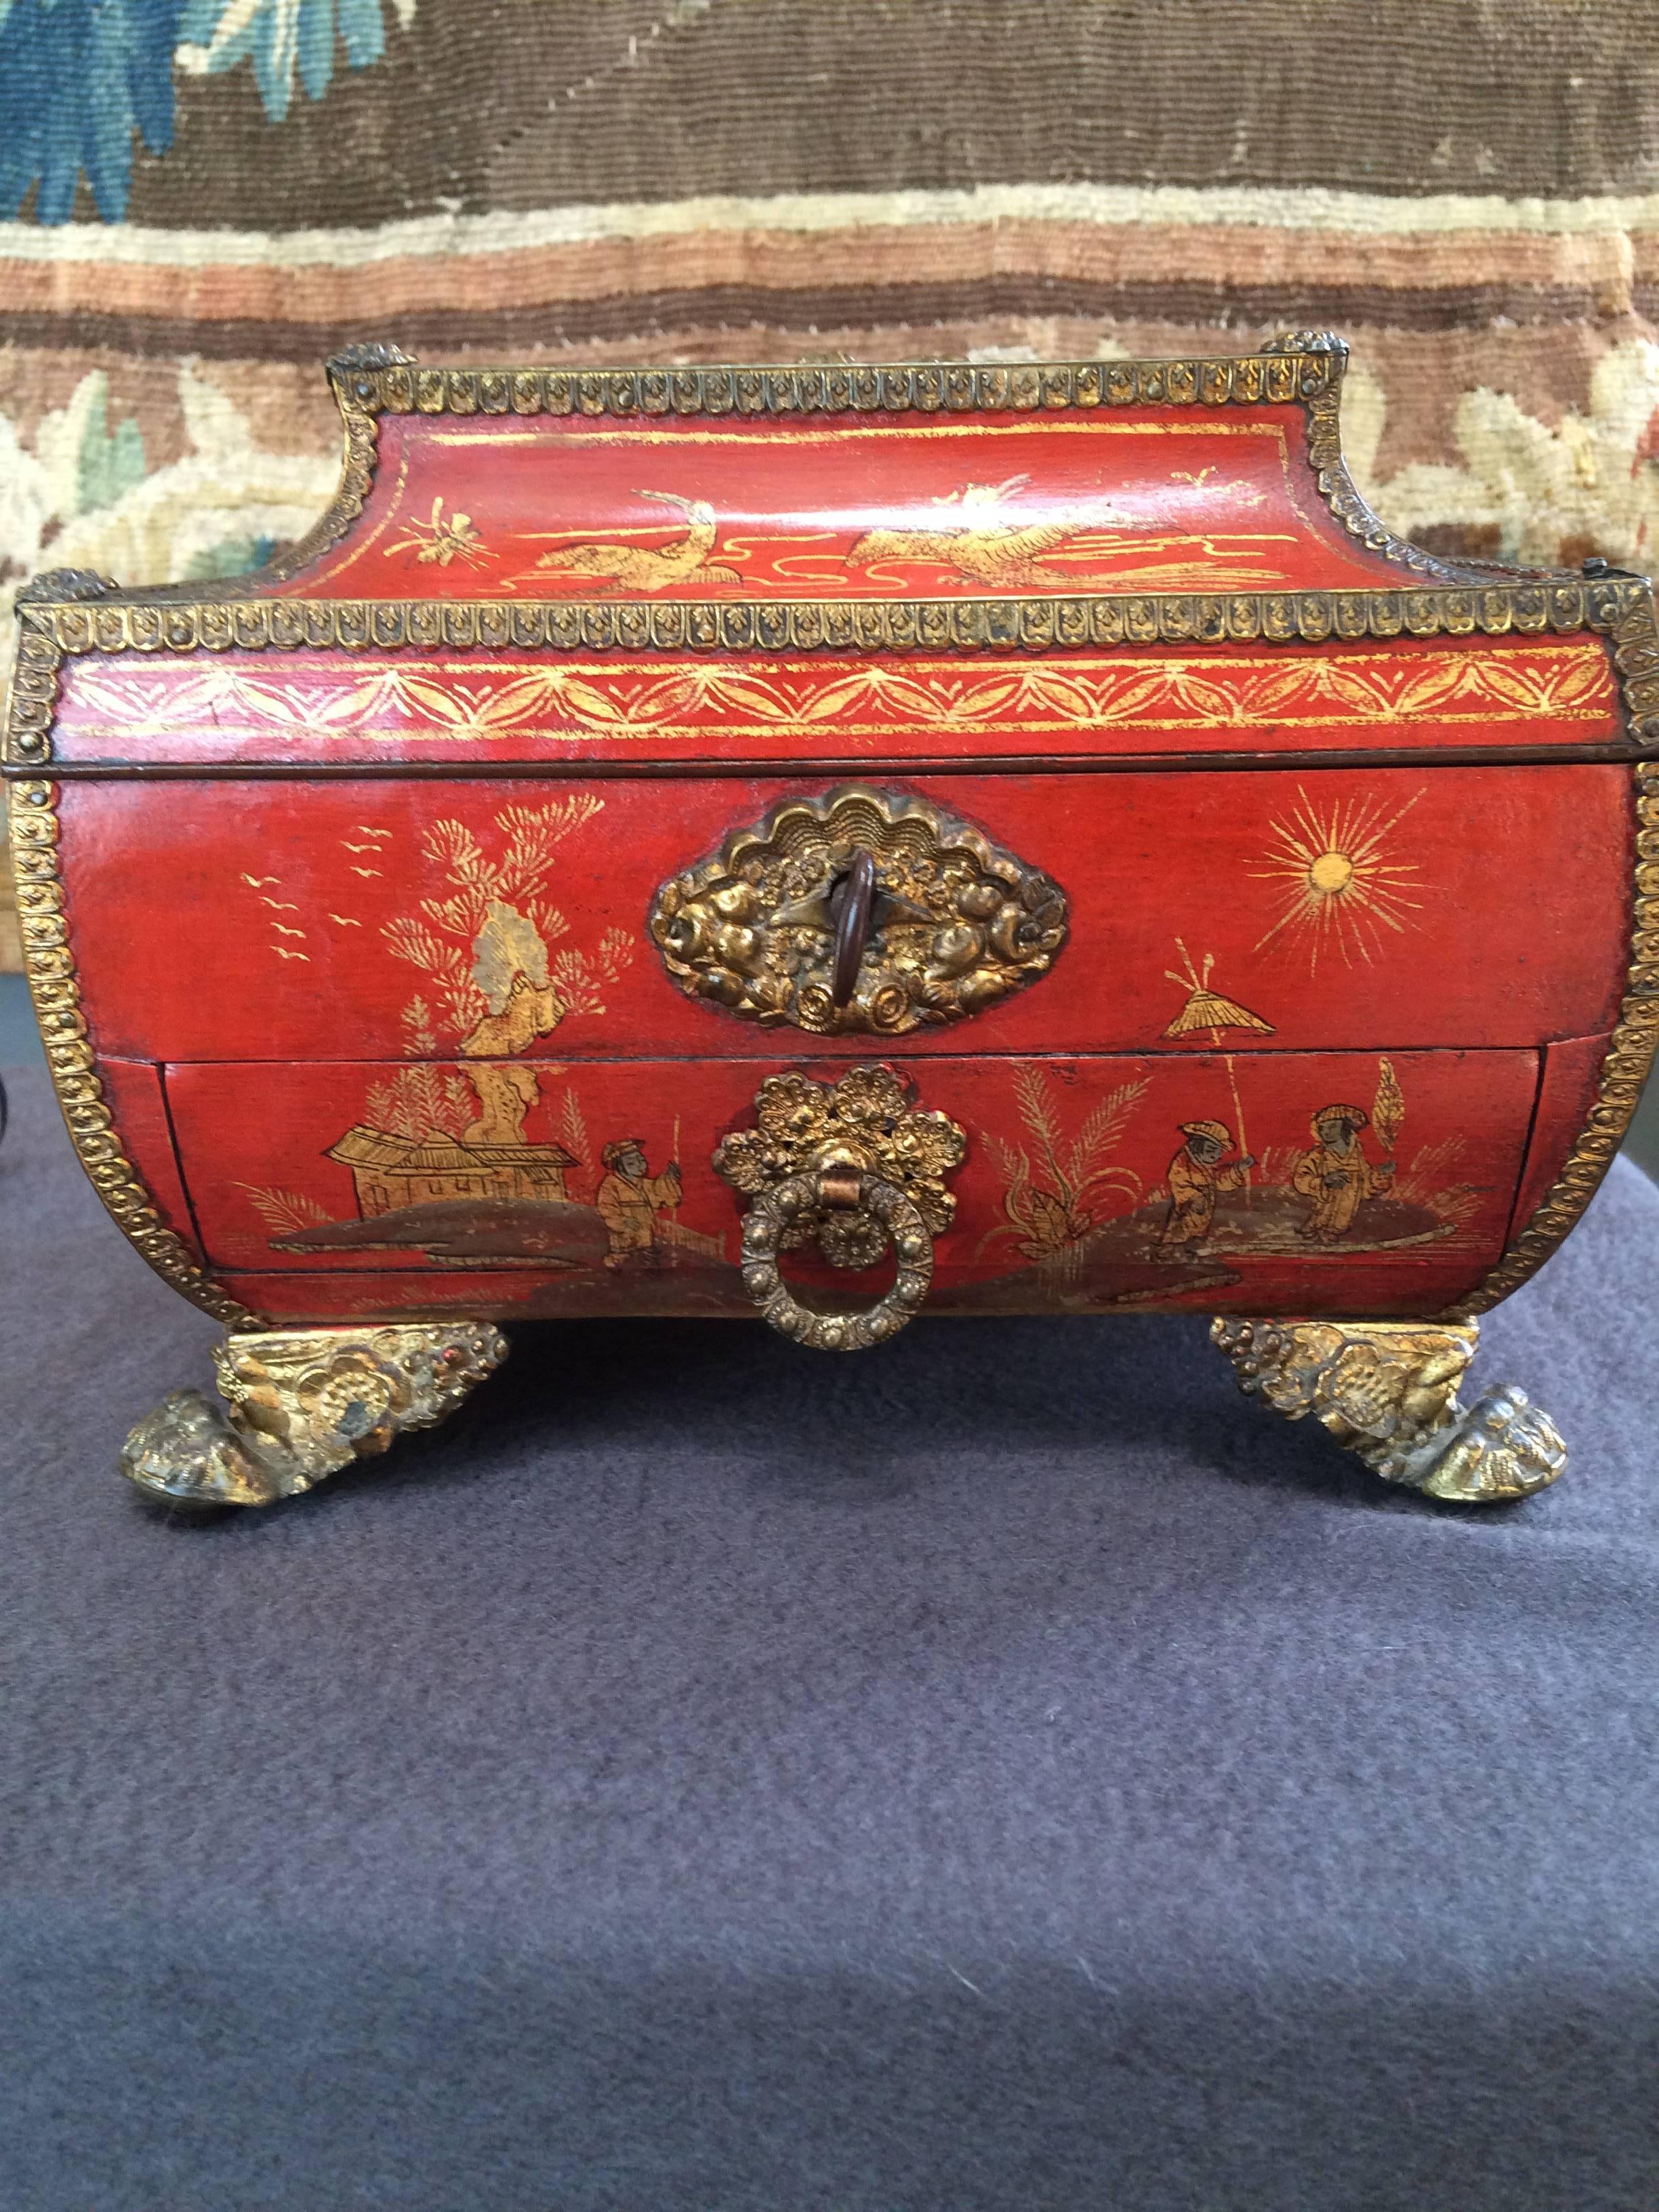 Beautiful small red lacquered chinoiserie sewing box with ormolu mounts
with finely detailed figural and landscape designs in gold, with lock and key.

Continental